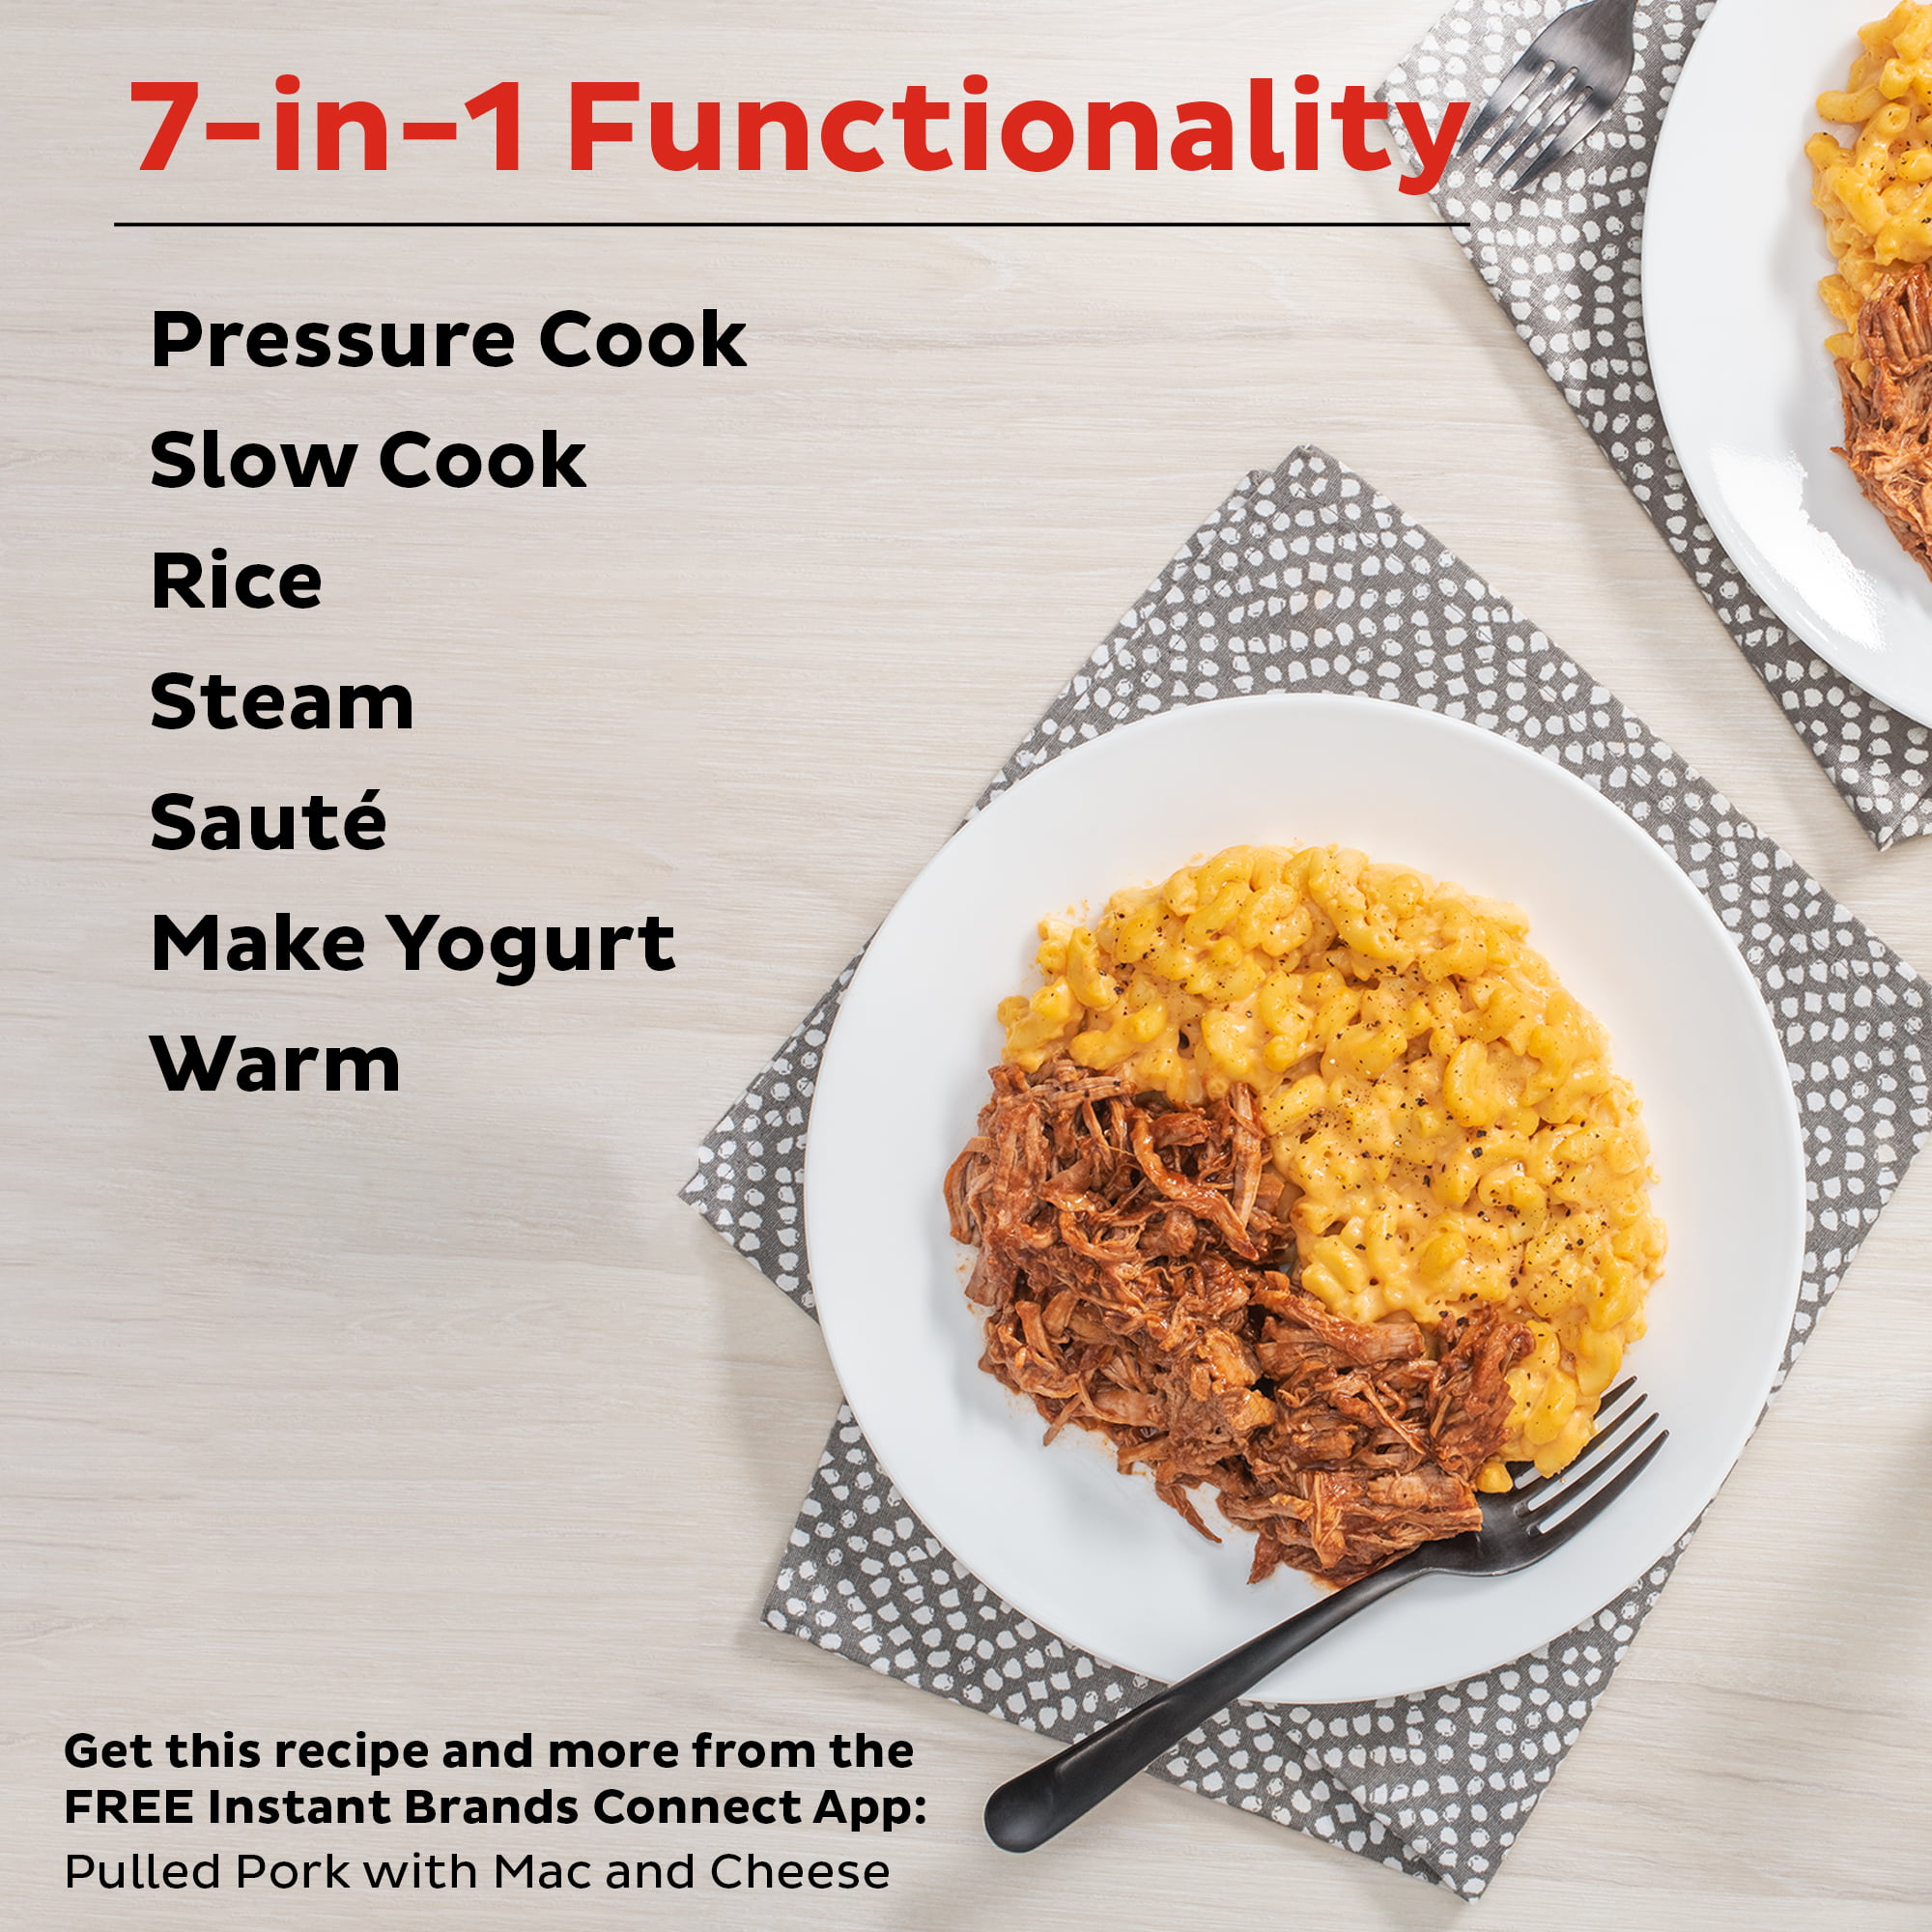 Deal: 7-in-1 Programmable Instant Pot Duo Mini, 3-Quart for $59 - 12/18/17